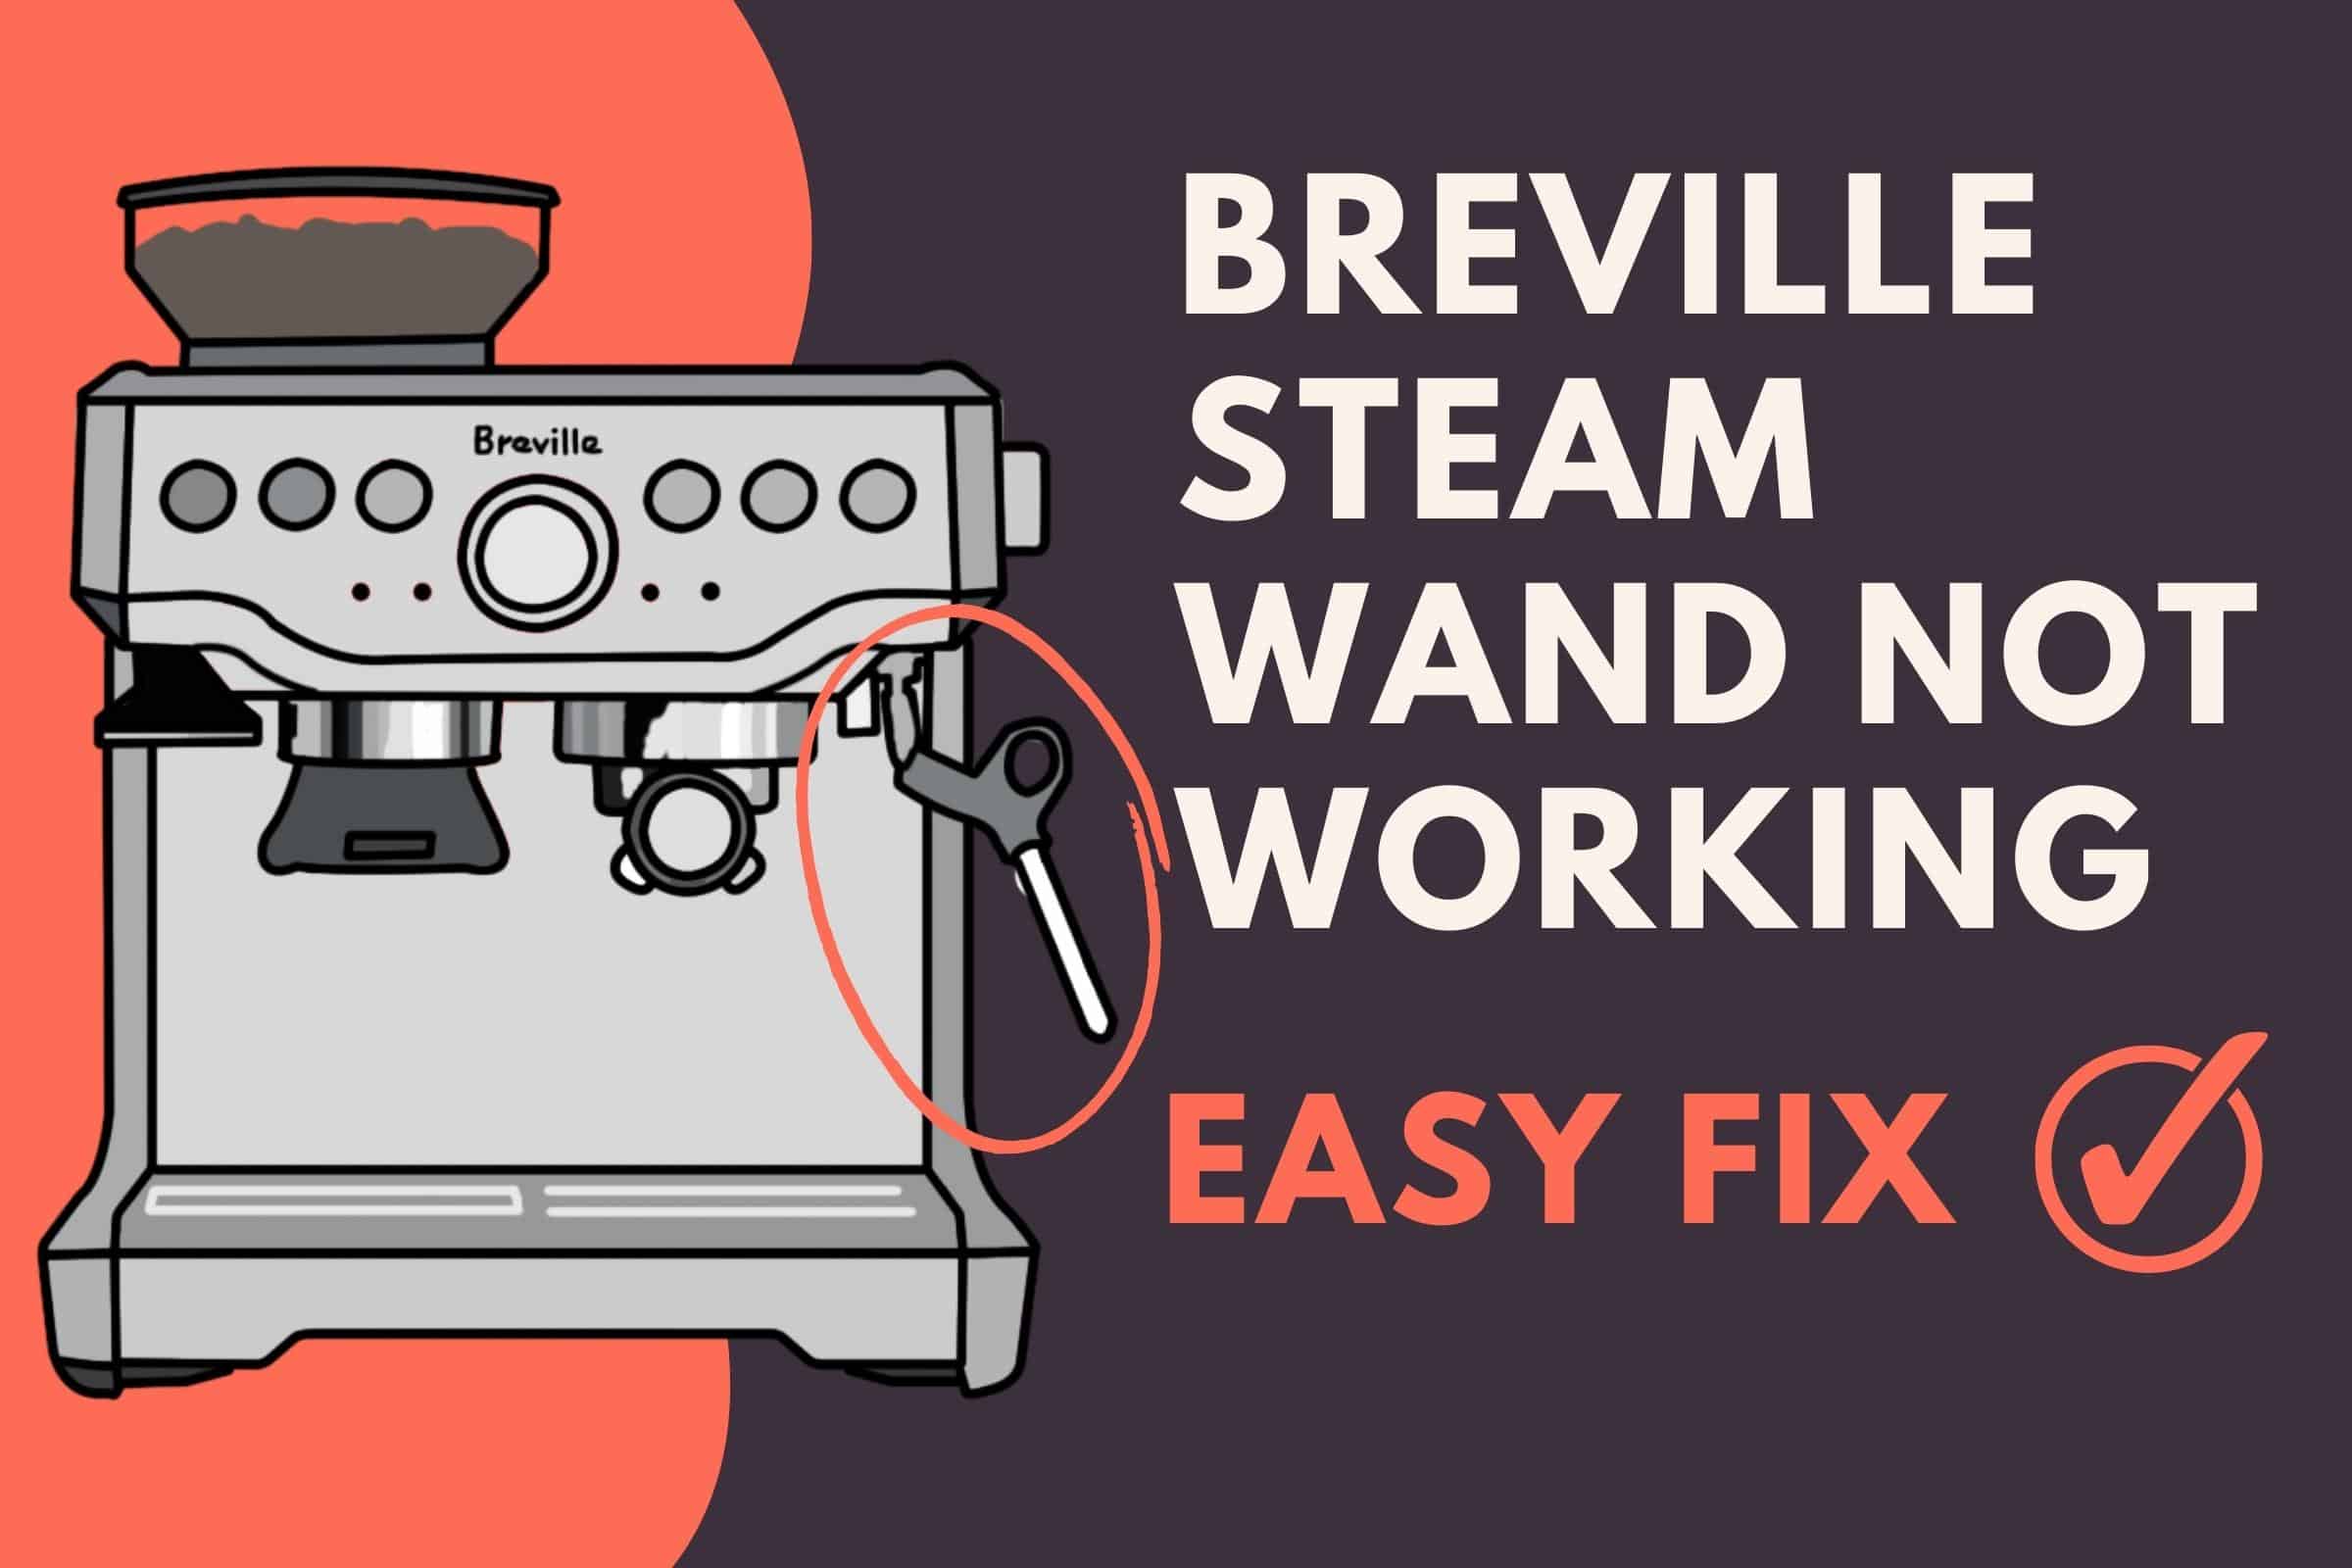 Breville steam wand is not working